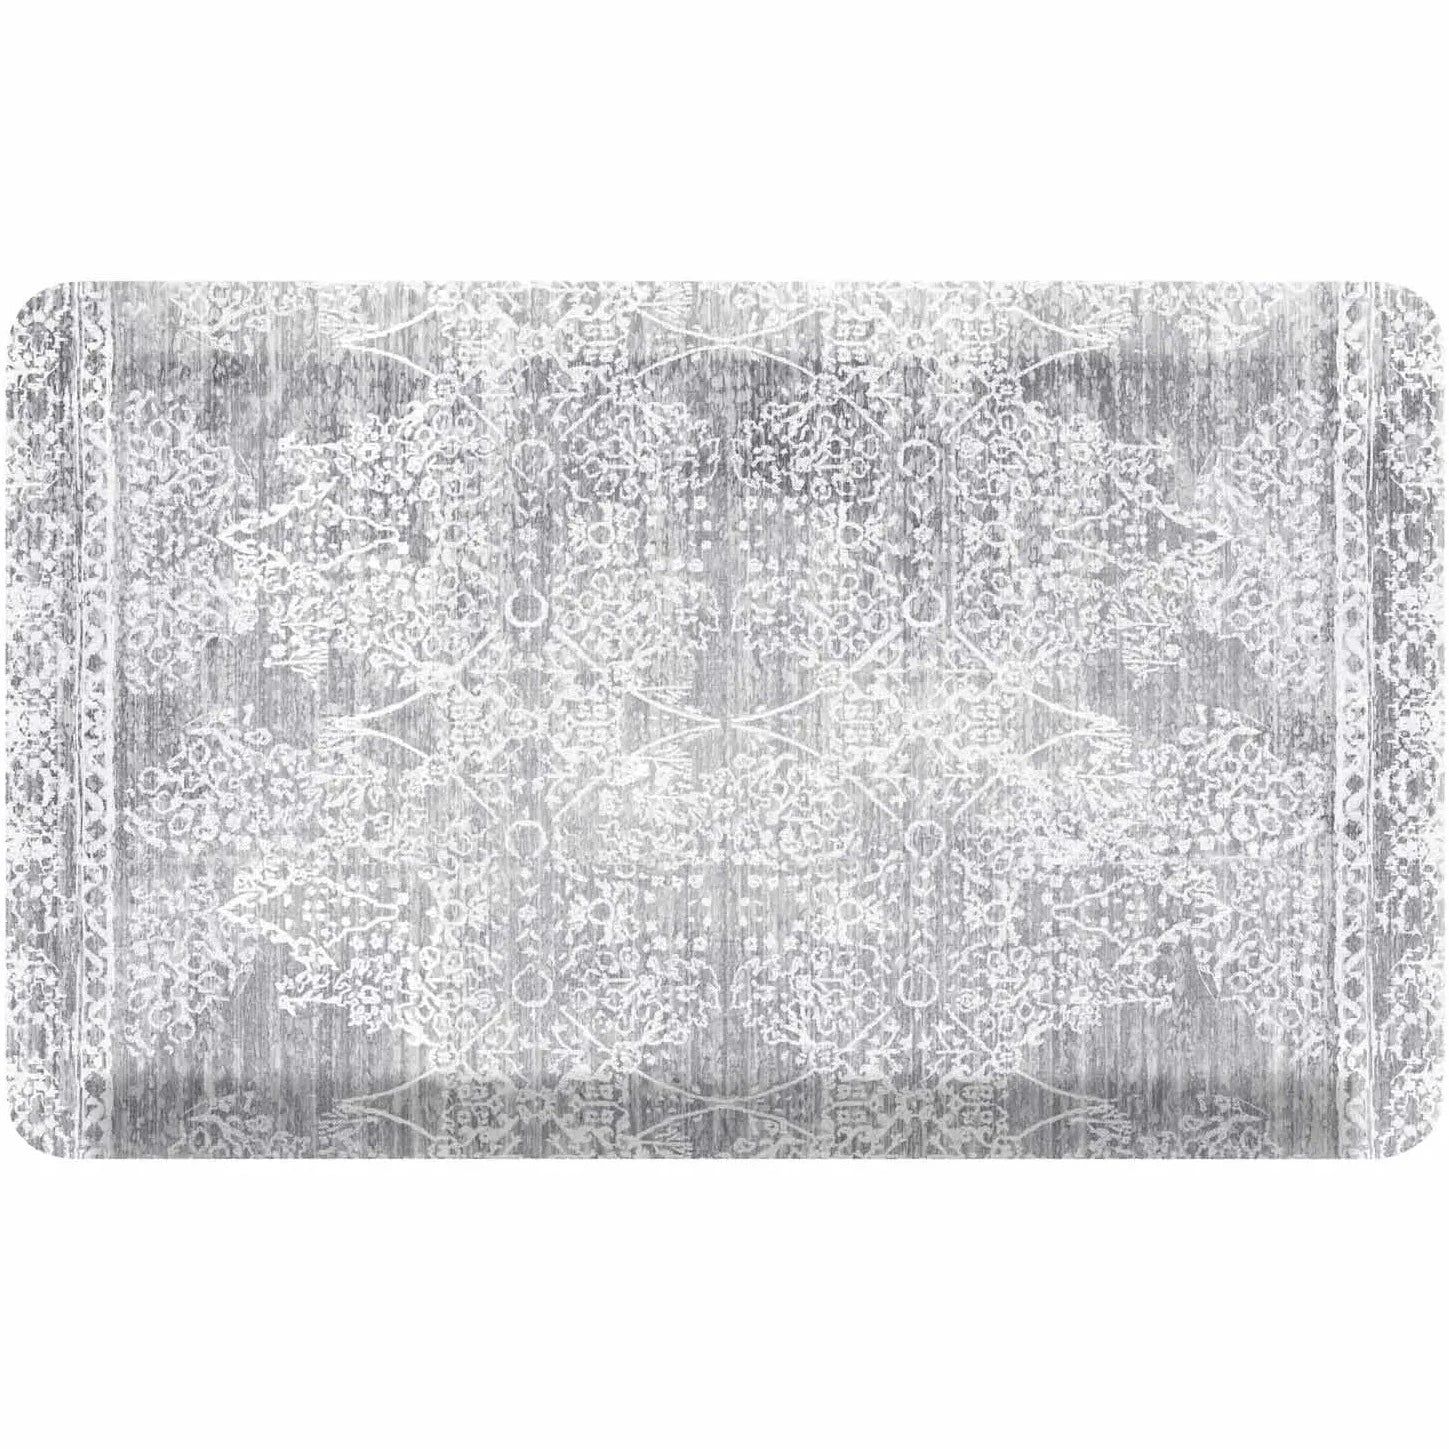 Nama Standing Mat | Minerals | House of Noa (formerly Little Nomad)